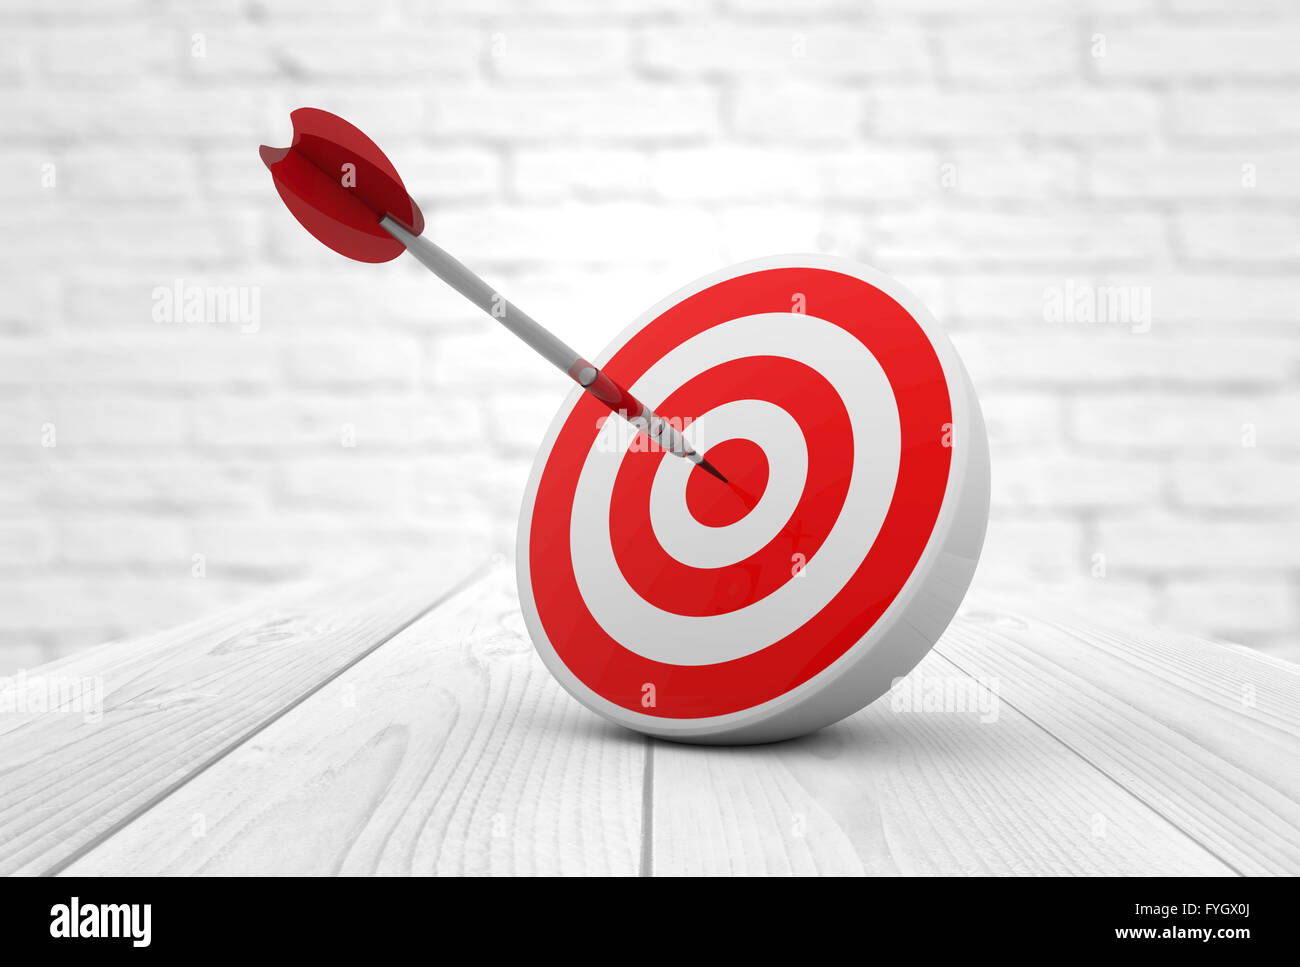 strategic business solutions or corporate strategy concept: digital generated dart in the center of a red target, modern wooden Stock Photo